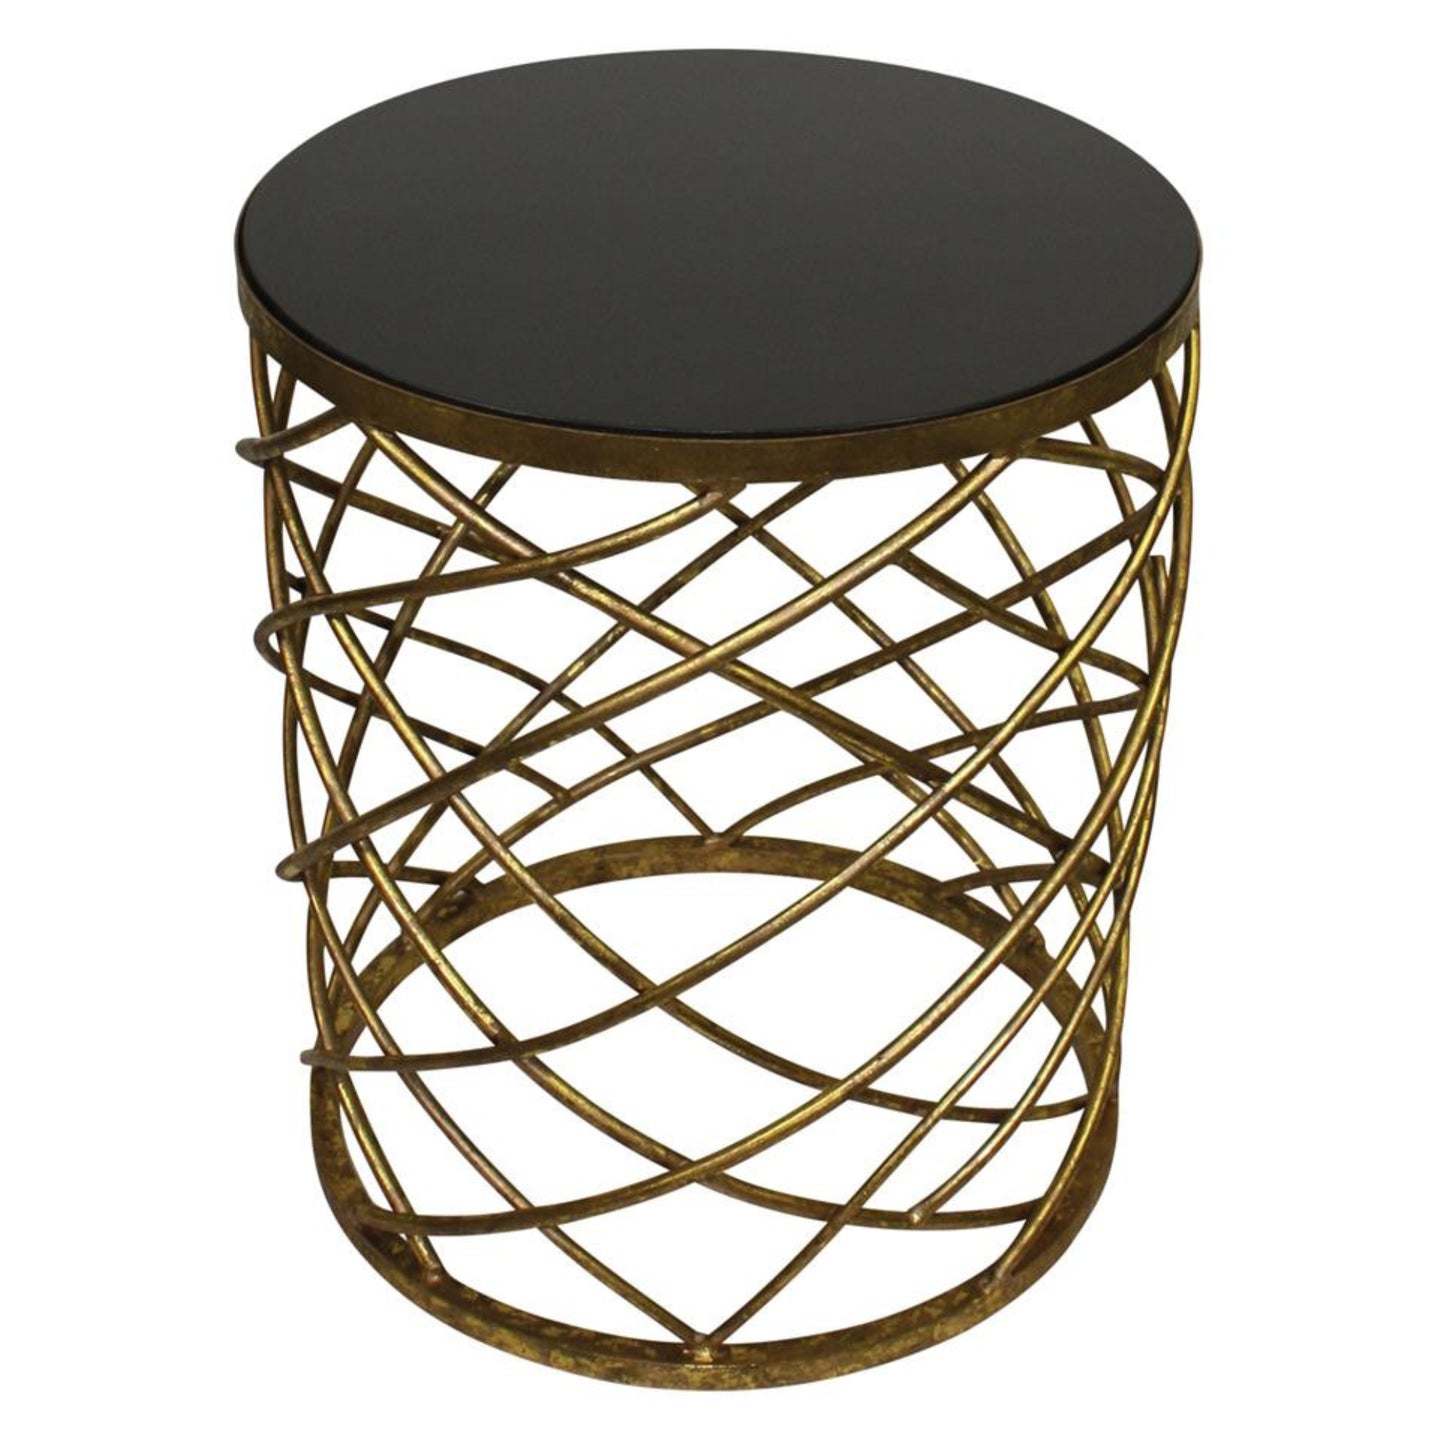 Italian Gold Round Abstract Iron Side Table with Black Granite Top | INSIDE OUT | InsideOutCatalog.com